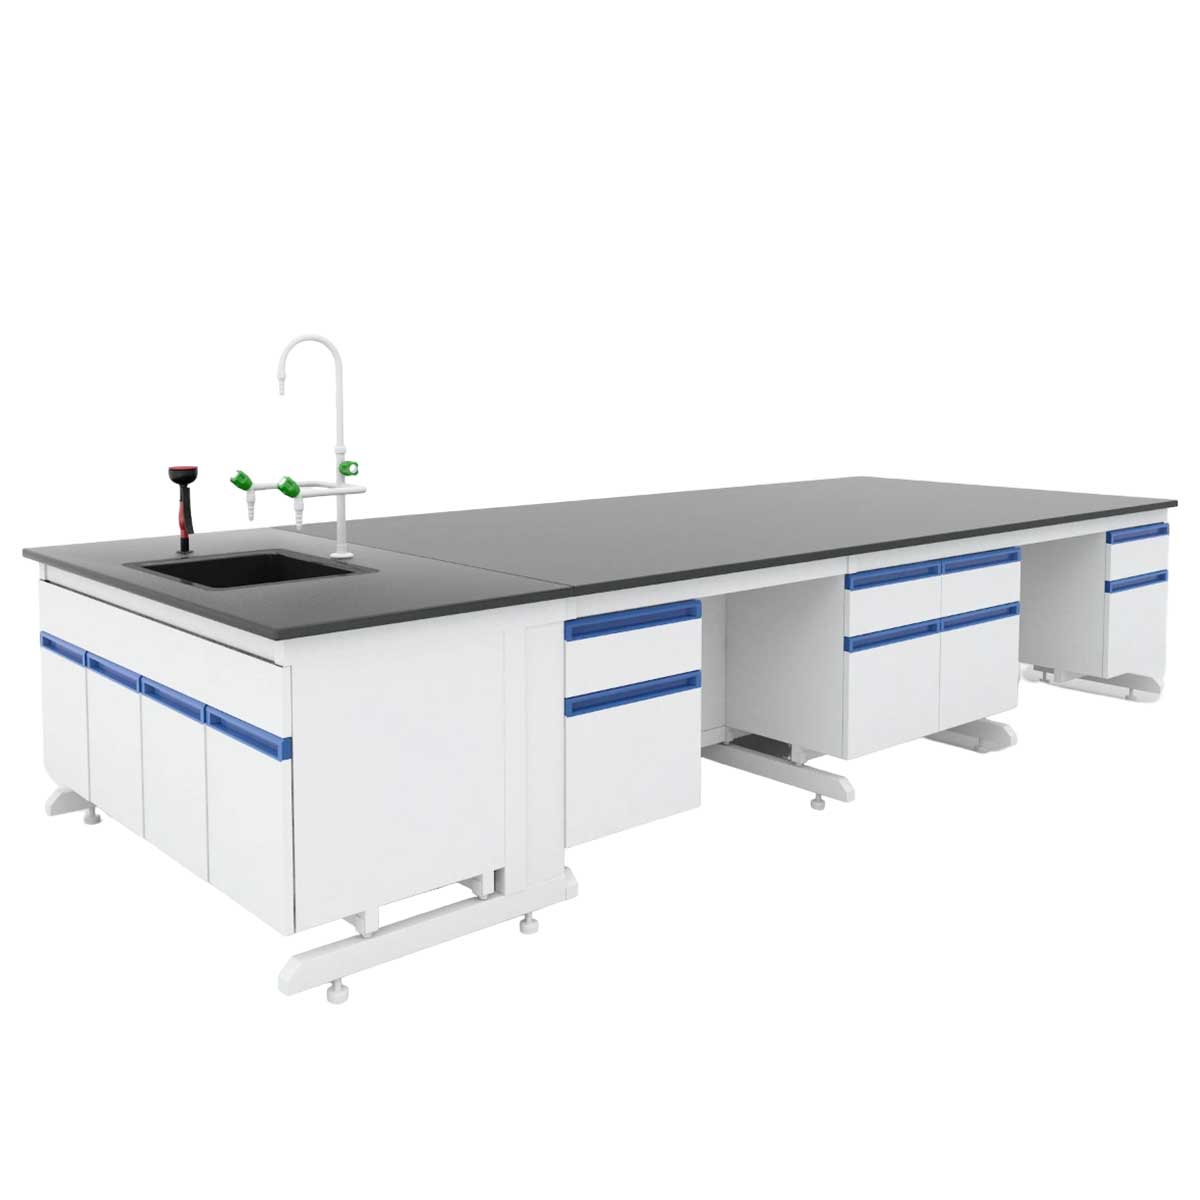 Physics Lab Furniture Manufacturers, Suppliers in Rohini Sector 22